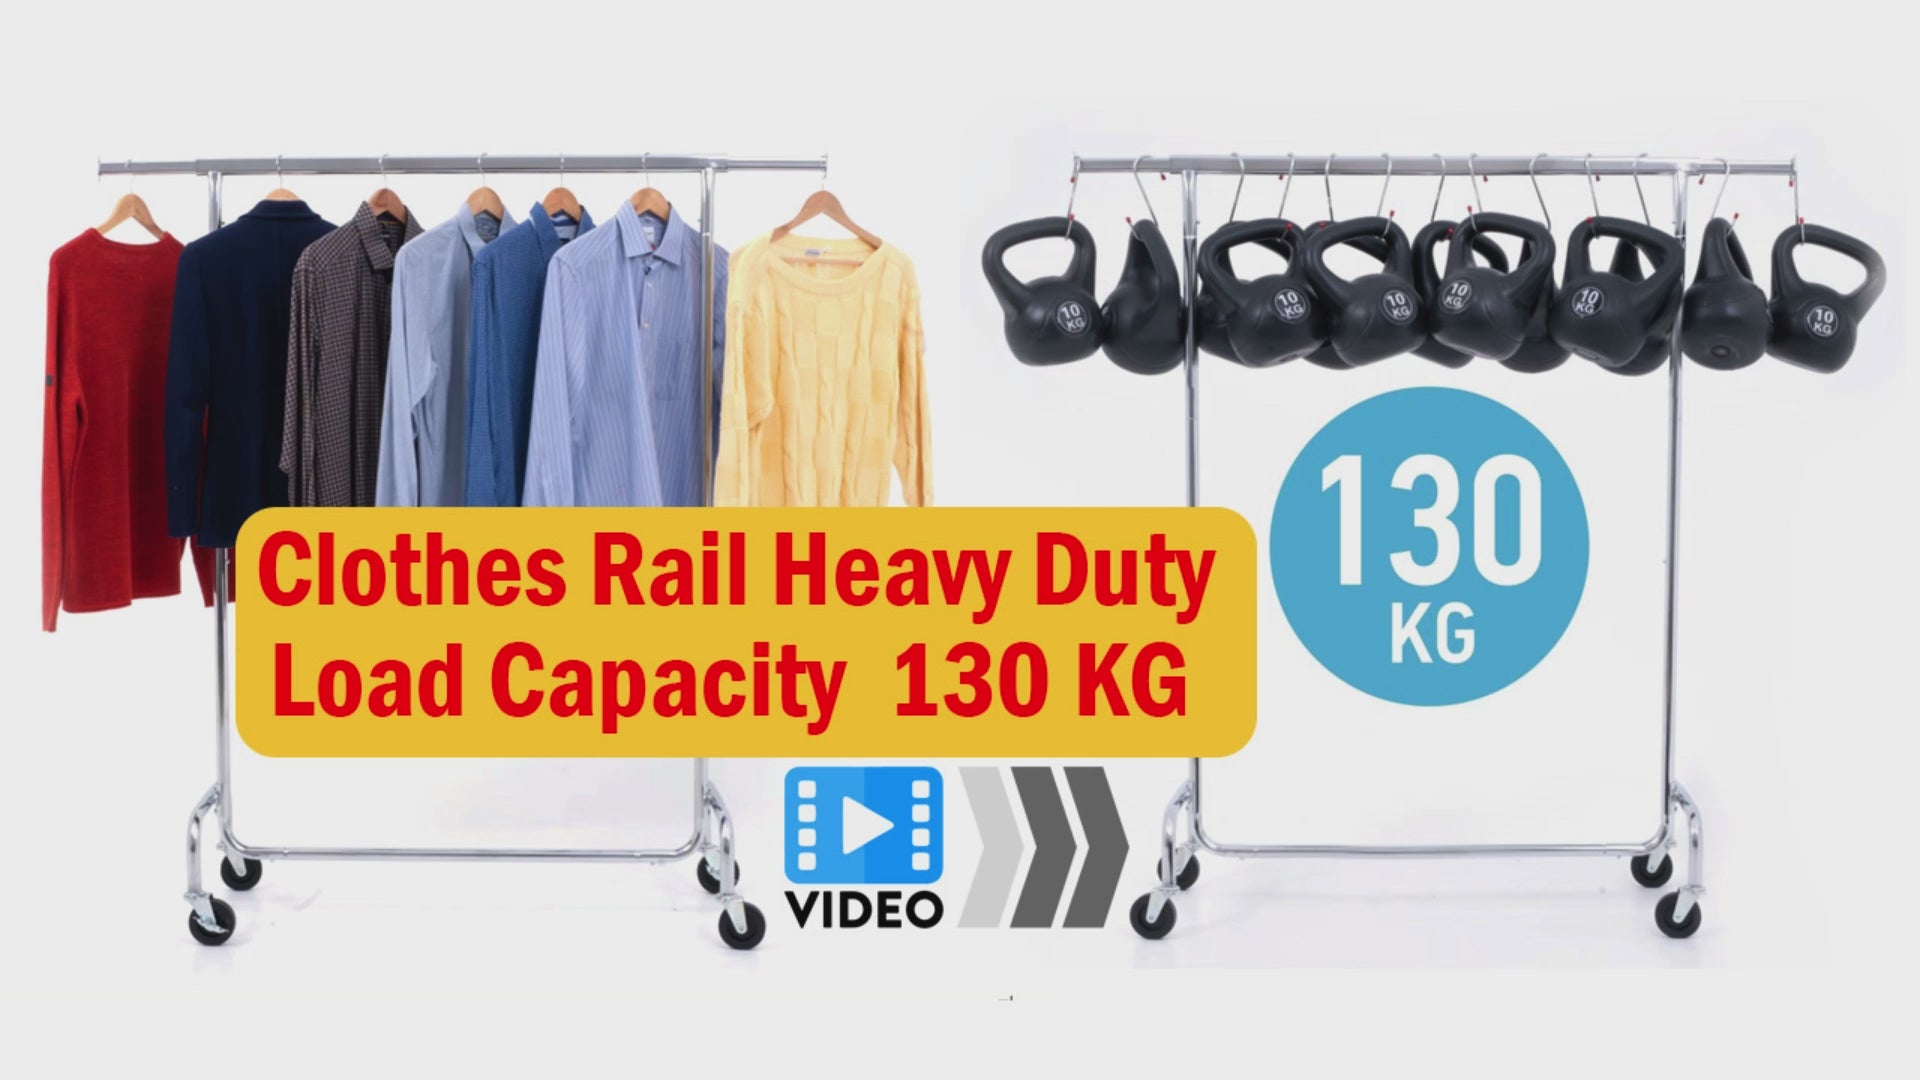 Heavy Duty Clothes Rail, Clothes Rail on Wheels, Clothing Rail for Hanging Clothes, Holds Up to 286 Lbs, Tatkraft Didrik